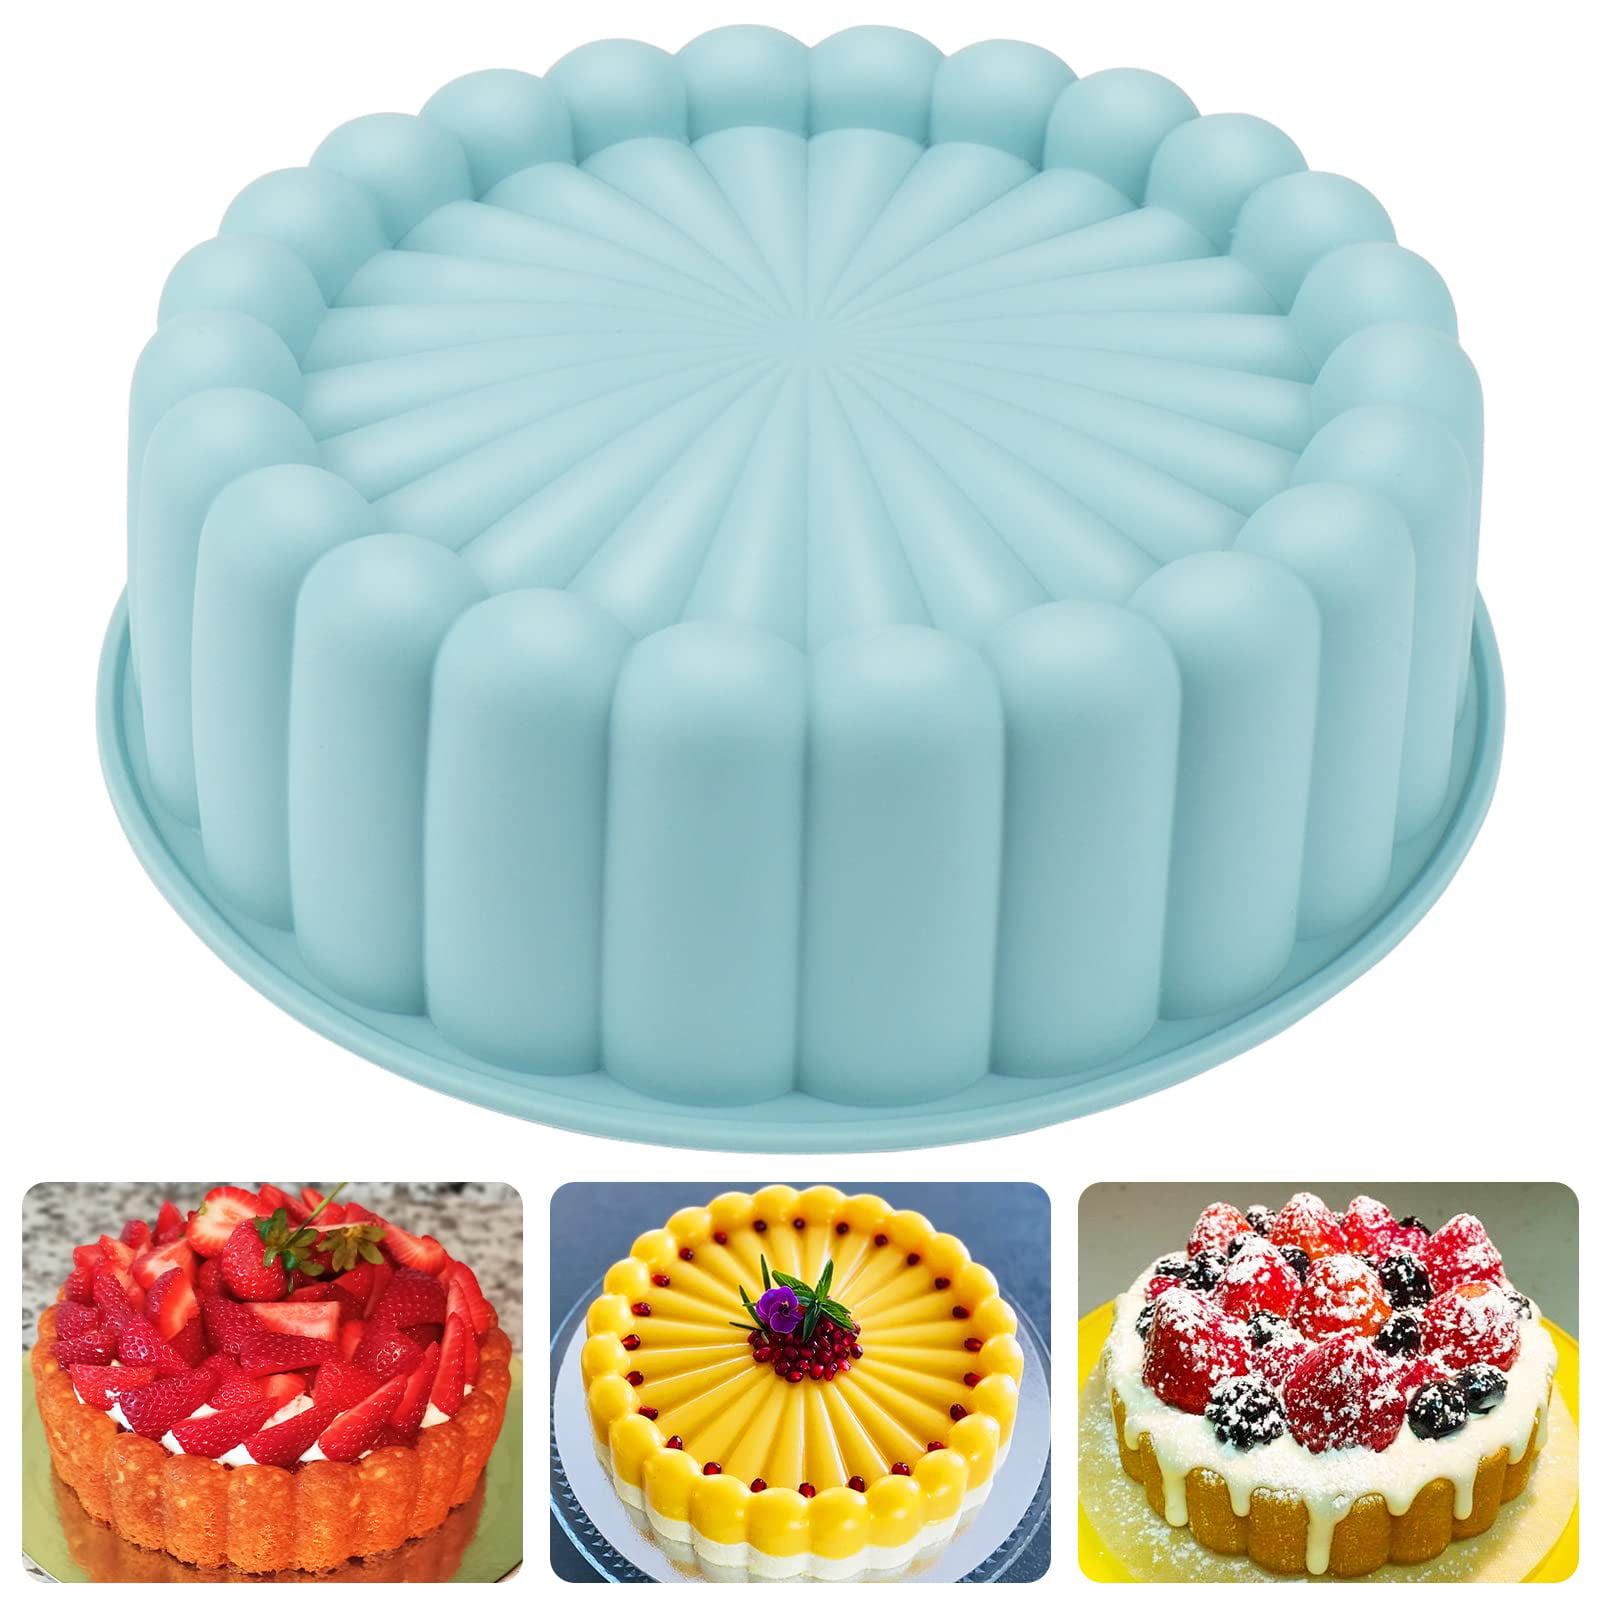 4 Pcs 8 inch Round Silicone Cake Pan, Silicone Cake Mold Non-Stick Layer  Cheesecake Mold for Rainbow Cake | Vegetable Pancake | Pizza Crust | Omelet  